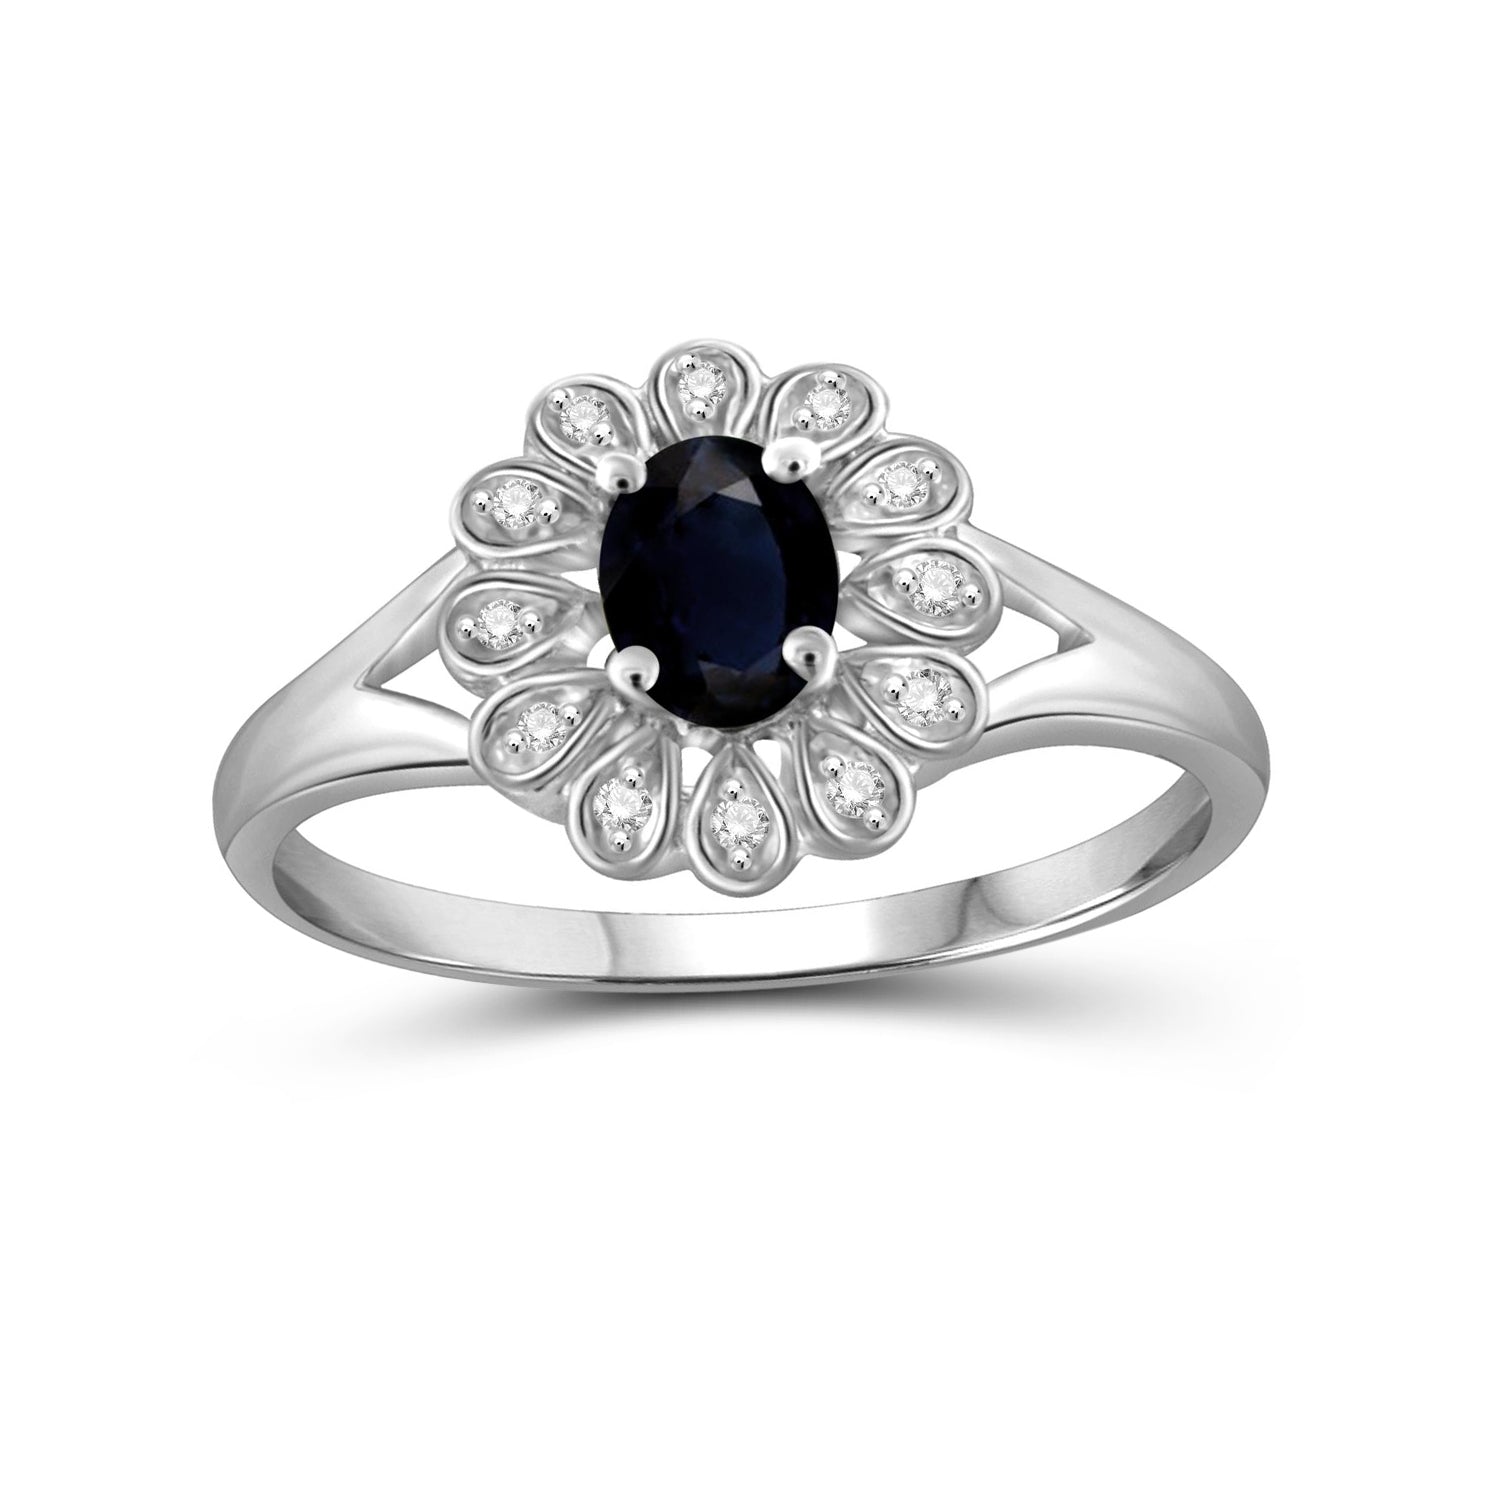 Sapphire Ring Birthstone Jewelry – 0.33 Carat Sapphire 0.925 Sterling Silver Ring Jewelry with White Diamond Accent – Gemstone Rings with Hypoallergenic 0.925 Sterling Silver Band